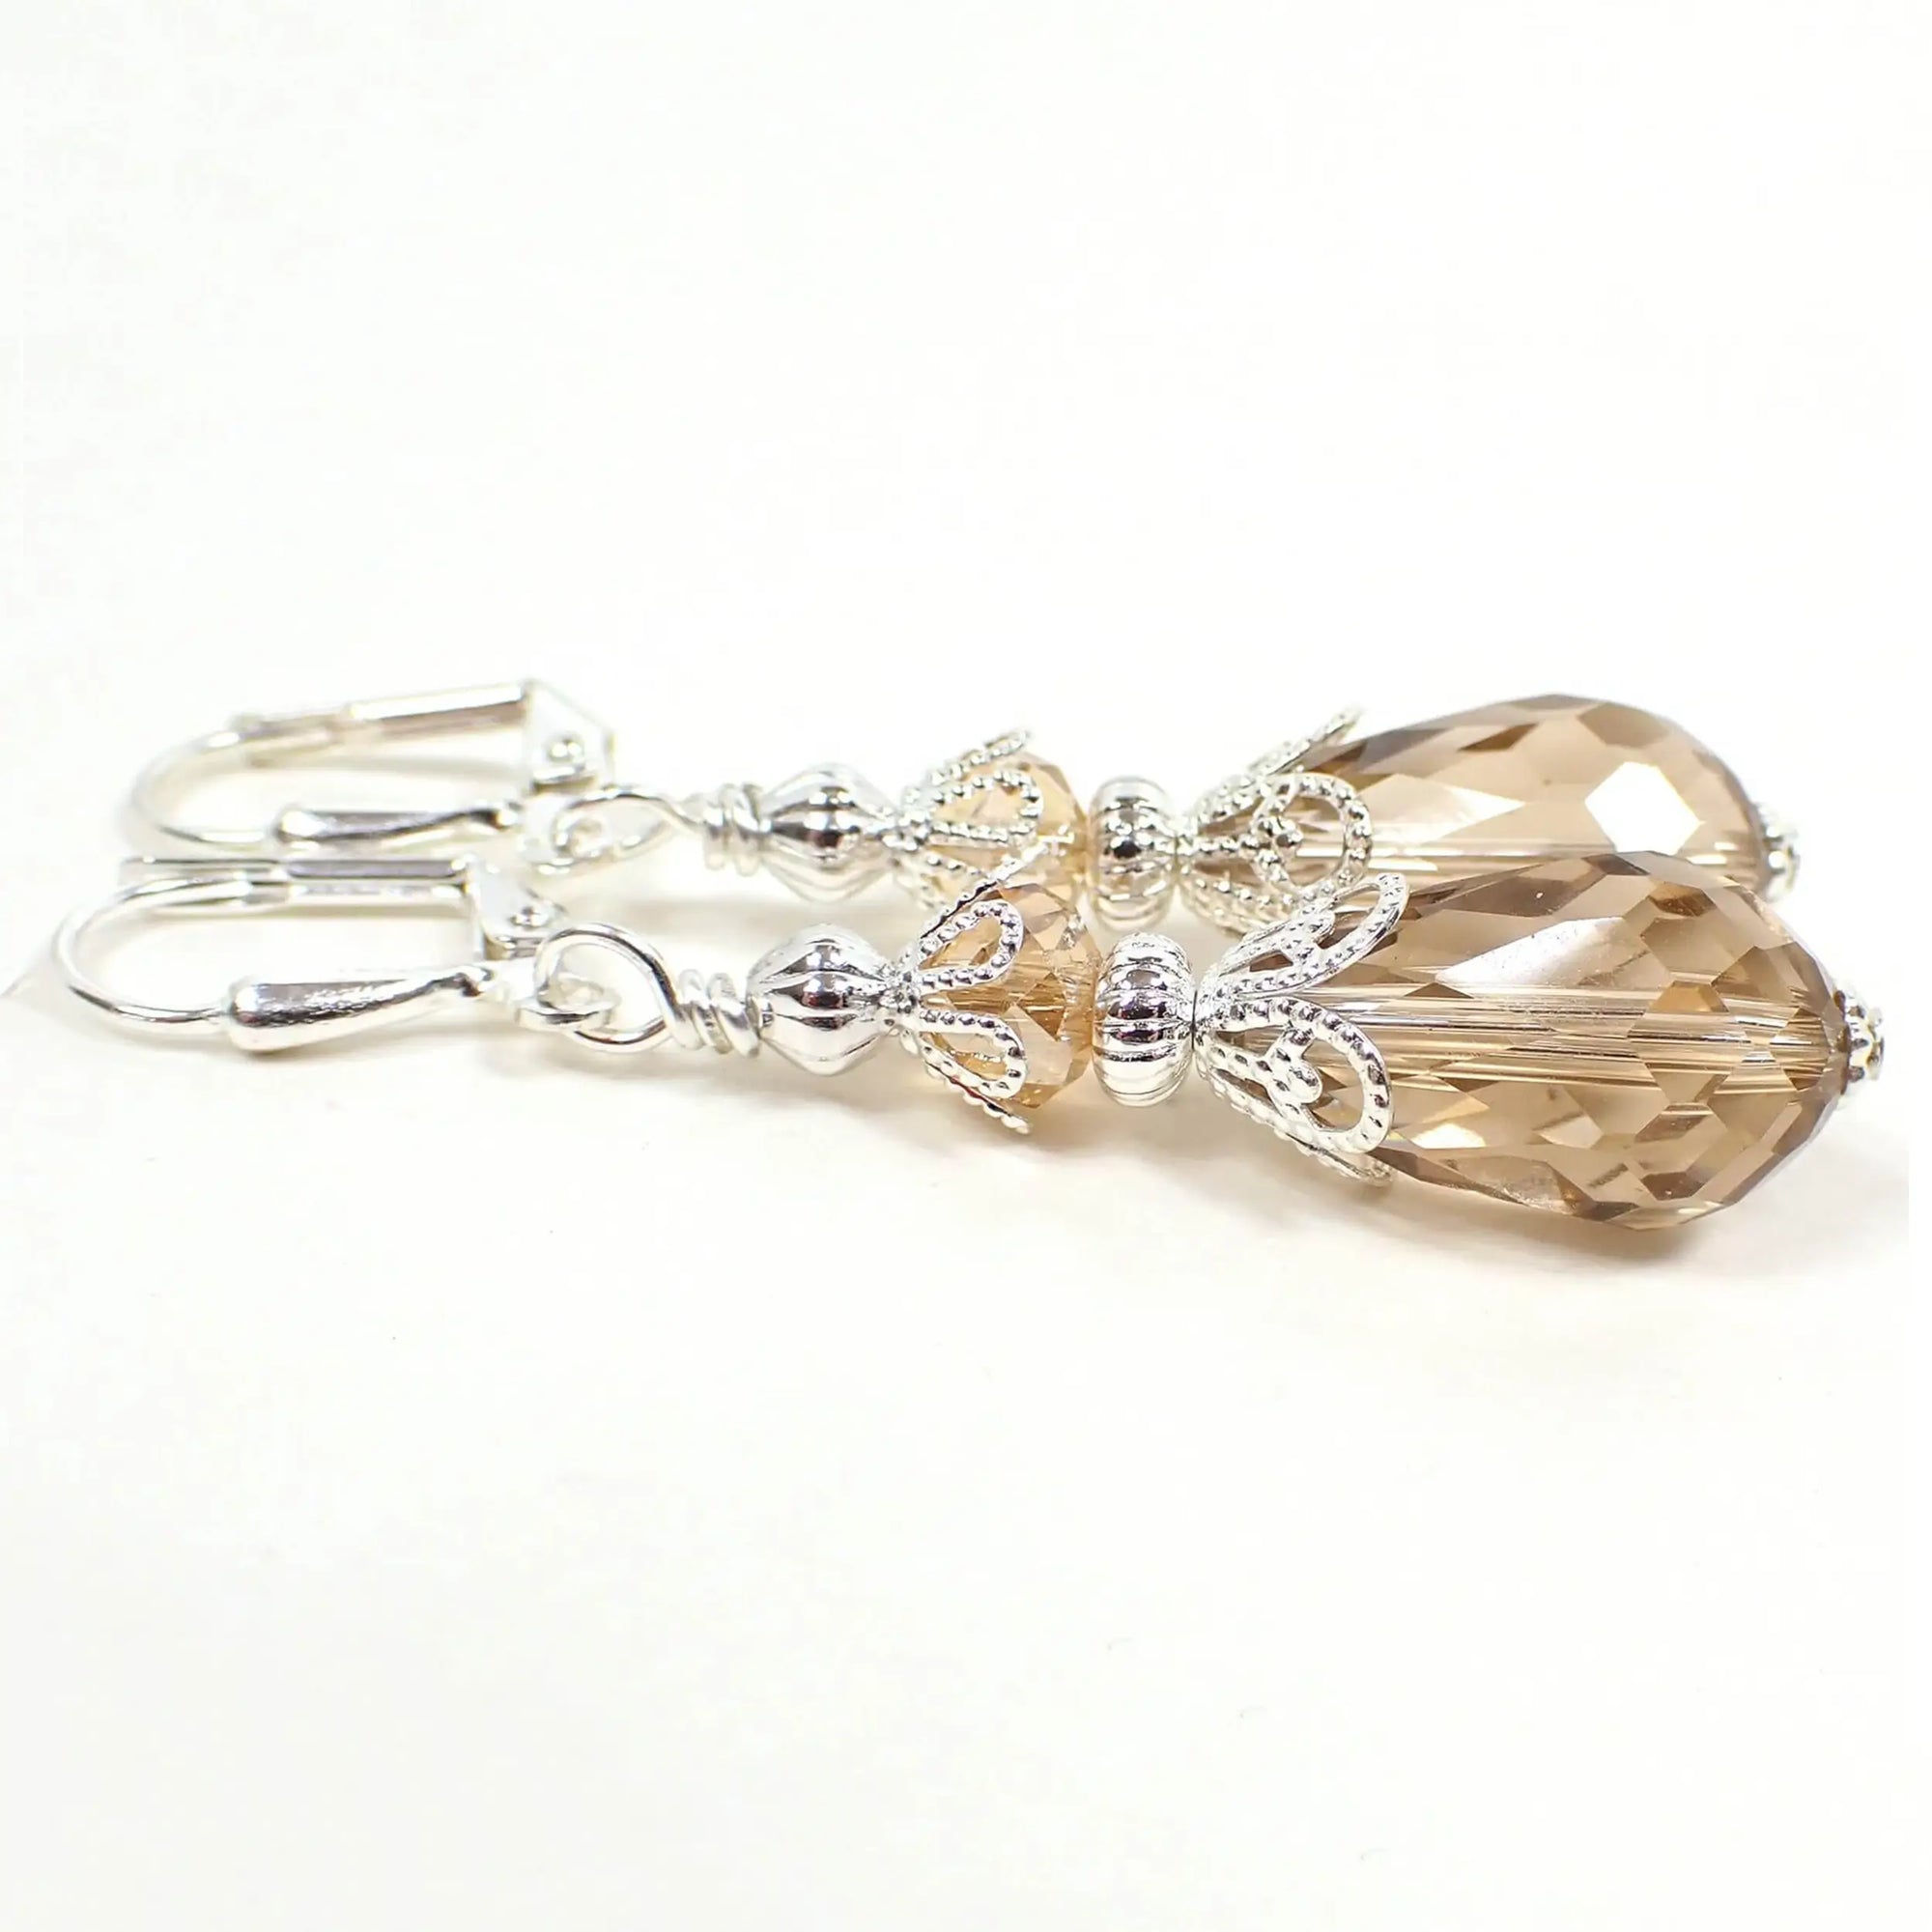 Side view of the handmade teardrop earrings. The metal is silver plated in color. There are faceted glass crystal rondelle beads on the top and teardrop beads on the bottom. The beads are a very light peach champagne color.